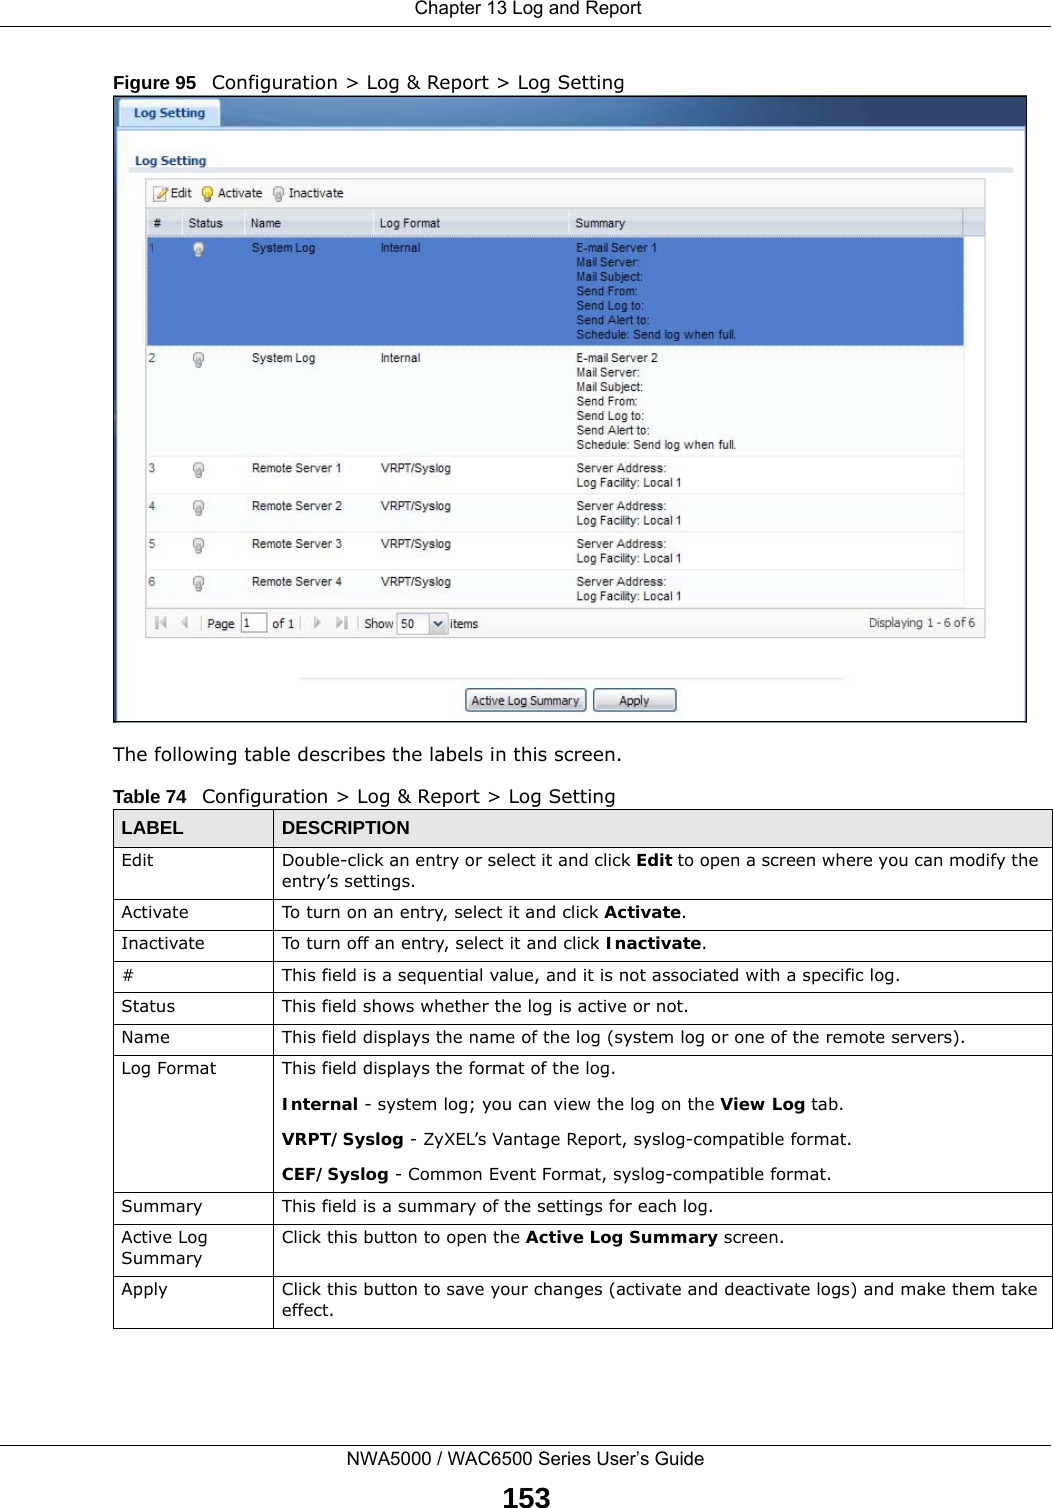  Chapter 13 Log and ReportNWA5000 / WAC6500 Series User’s Guide153Figure 95   Configuration &gt; Log &amp; Report &gt; Log SettingThe following table describes the labels in this screen. Table 74   Configuration &gt; Log &amp; Report &gt; Log SettingLABEL DESCRIPTIONEdit Double-click an entry or select it and click Edit to open a screen where you can modify the entry’s settings. Activate To turn on an entry, select it and click Activate.Inactivate To turn off an entry, select it and click Inactivate.# This field is a sequential value, and it is not associated with a specific log.Status This field shows whether the log is active or not.Name This field displays the name of the log (system log or one of the remote servers).Log Format This field displays the format of the log. Internal - system log; you can view the log on the View Log tab.VRPT/Syslog - ZyXEL’s Vantage Report, syslog-compatible format.CEF/Syslog - Common Event Format, syslog-compatible format.Summary This field is a summary of the settings for each log.Active Log SummaryClick this button to open the Active Log Summary screen.Apply Click this button to save your changes (activate and deactivate logs) and make them take effect.